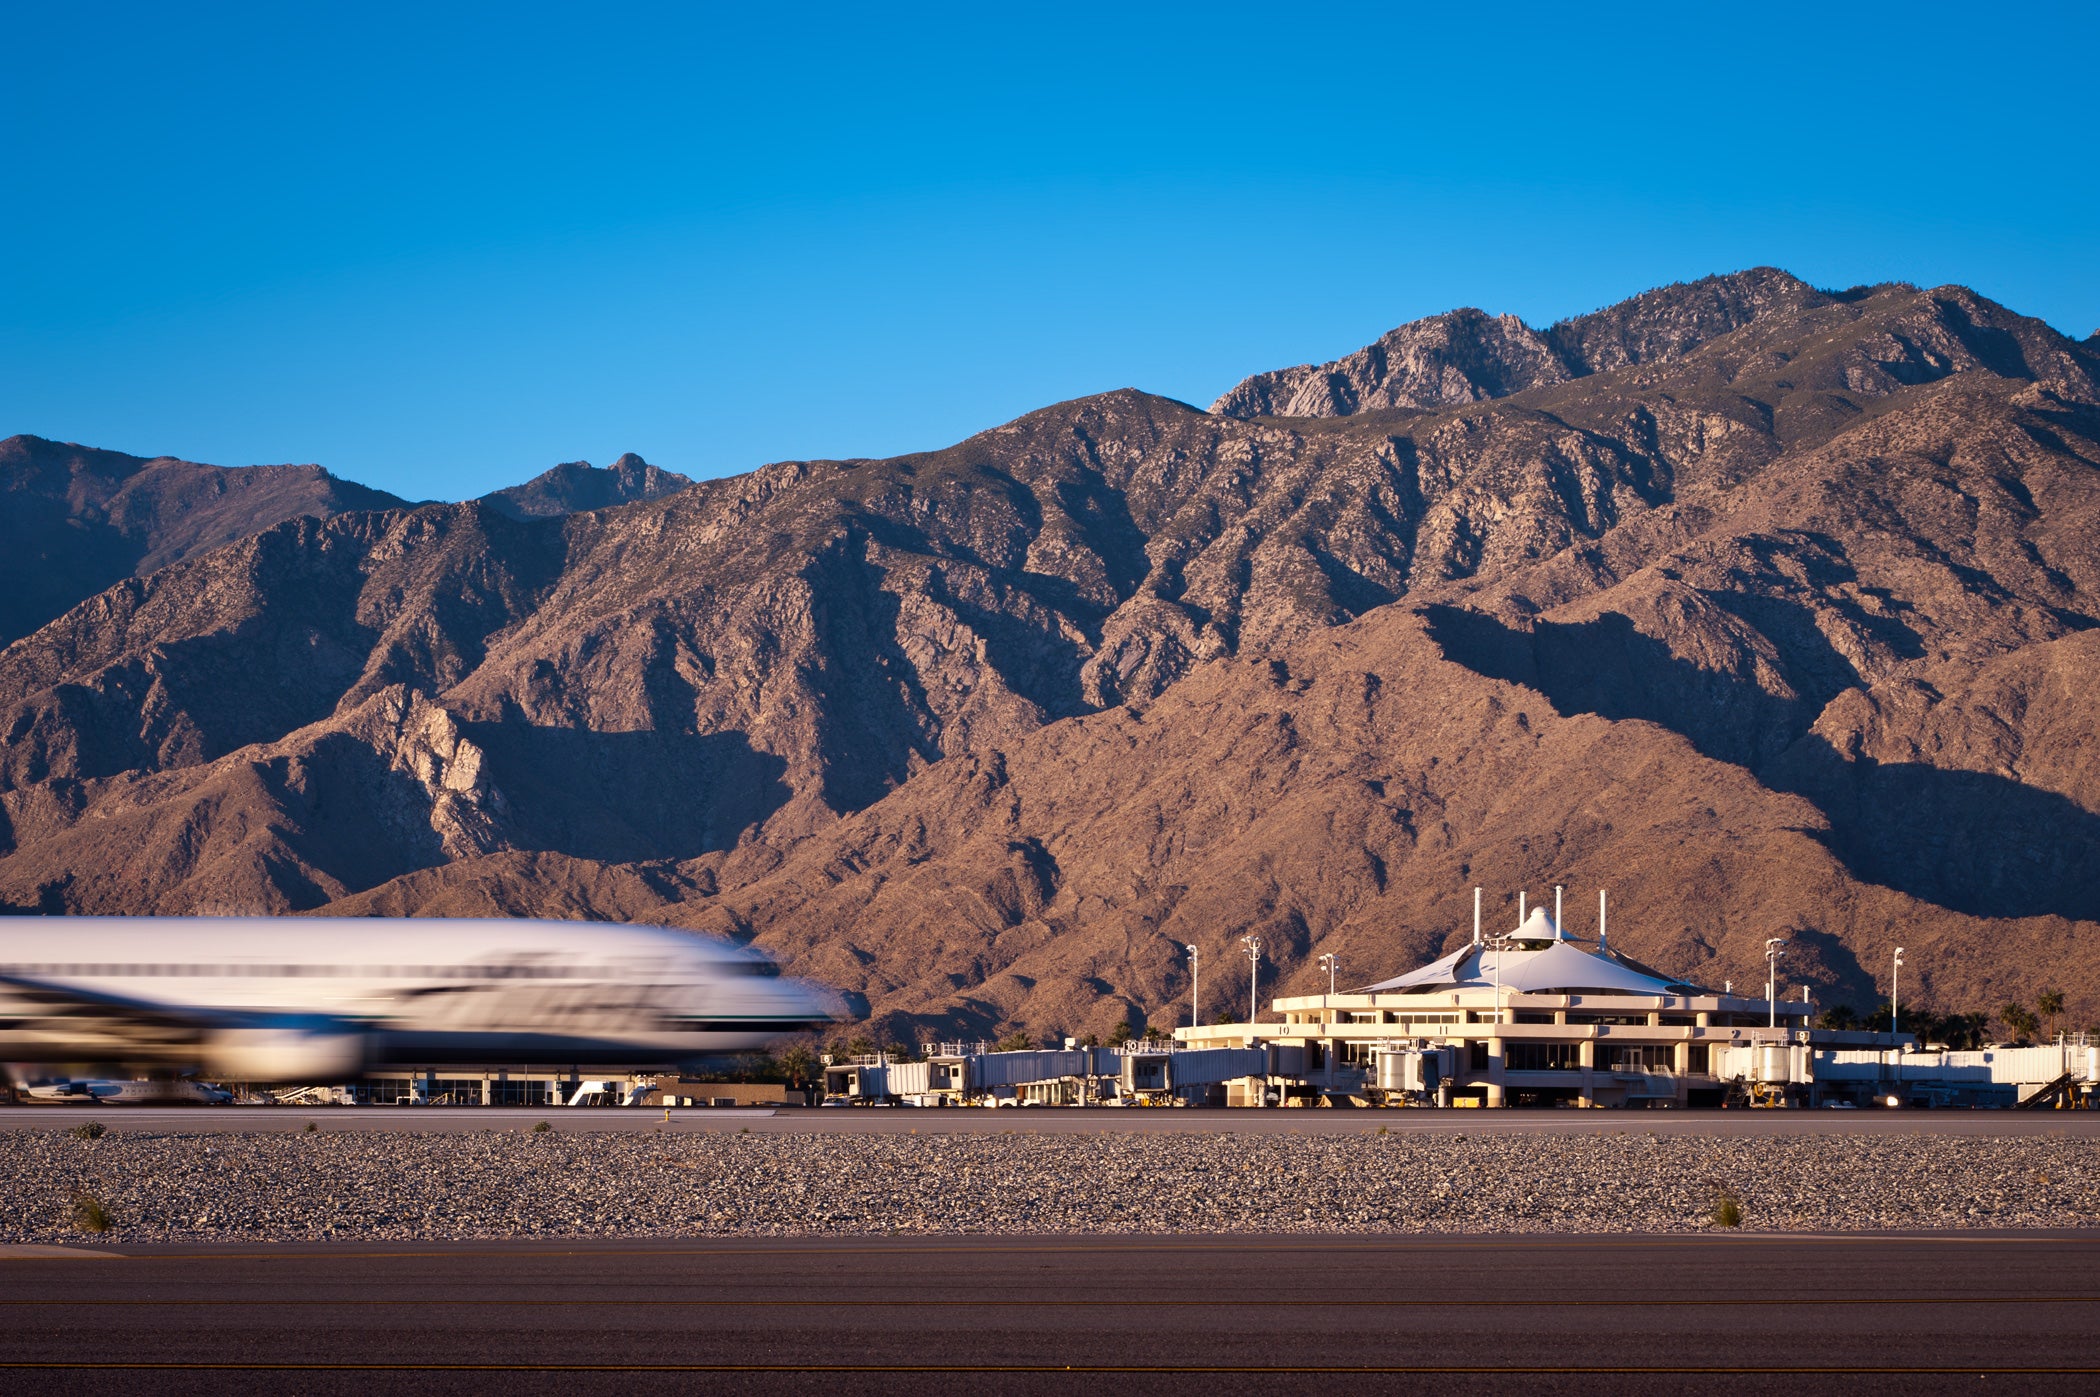 Palm Springs is booming with new flights during the pandemic. But is it sustainable?